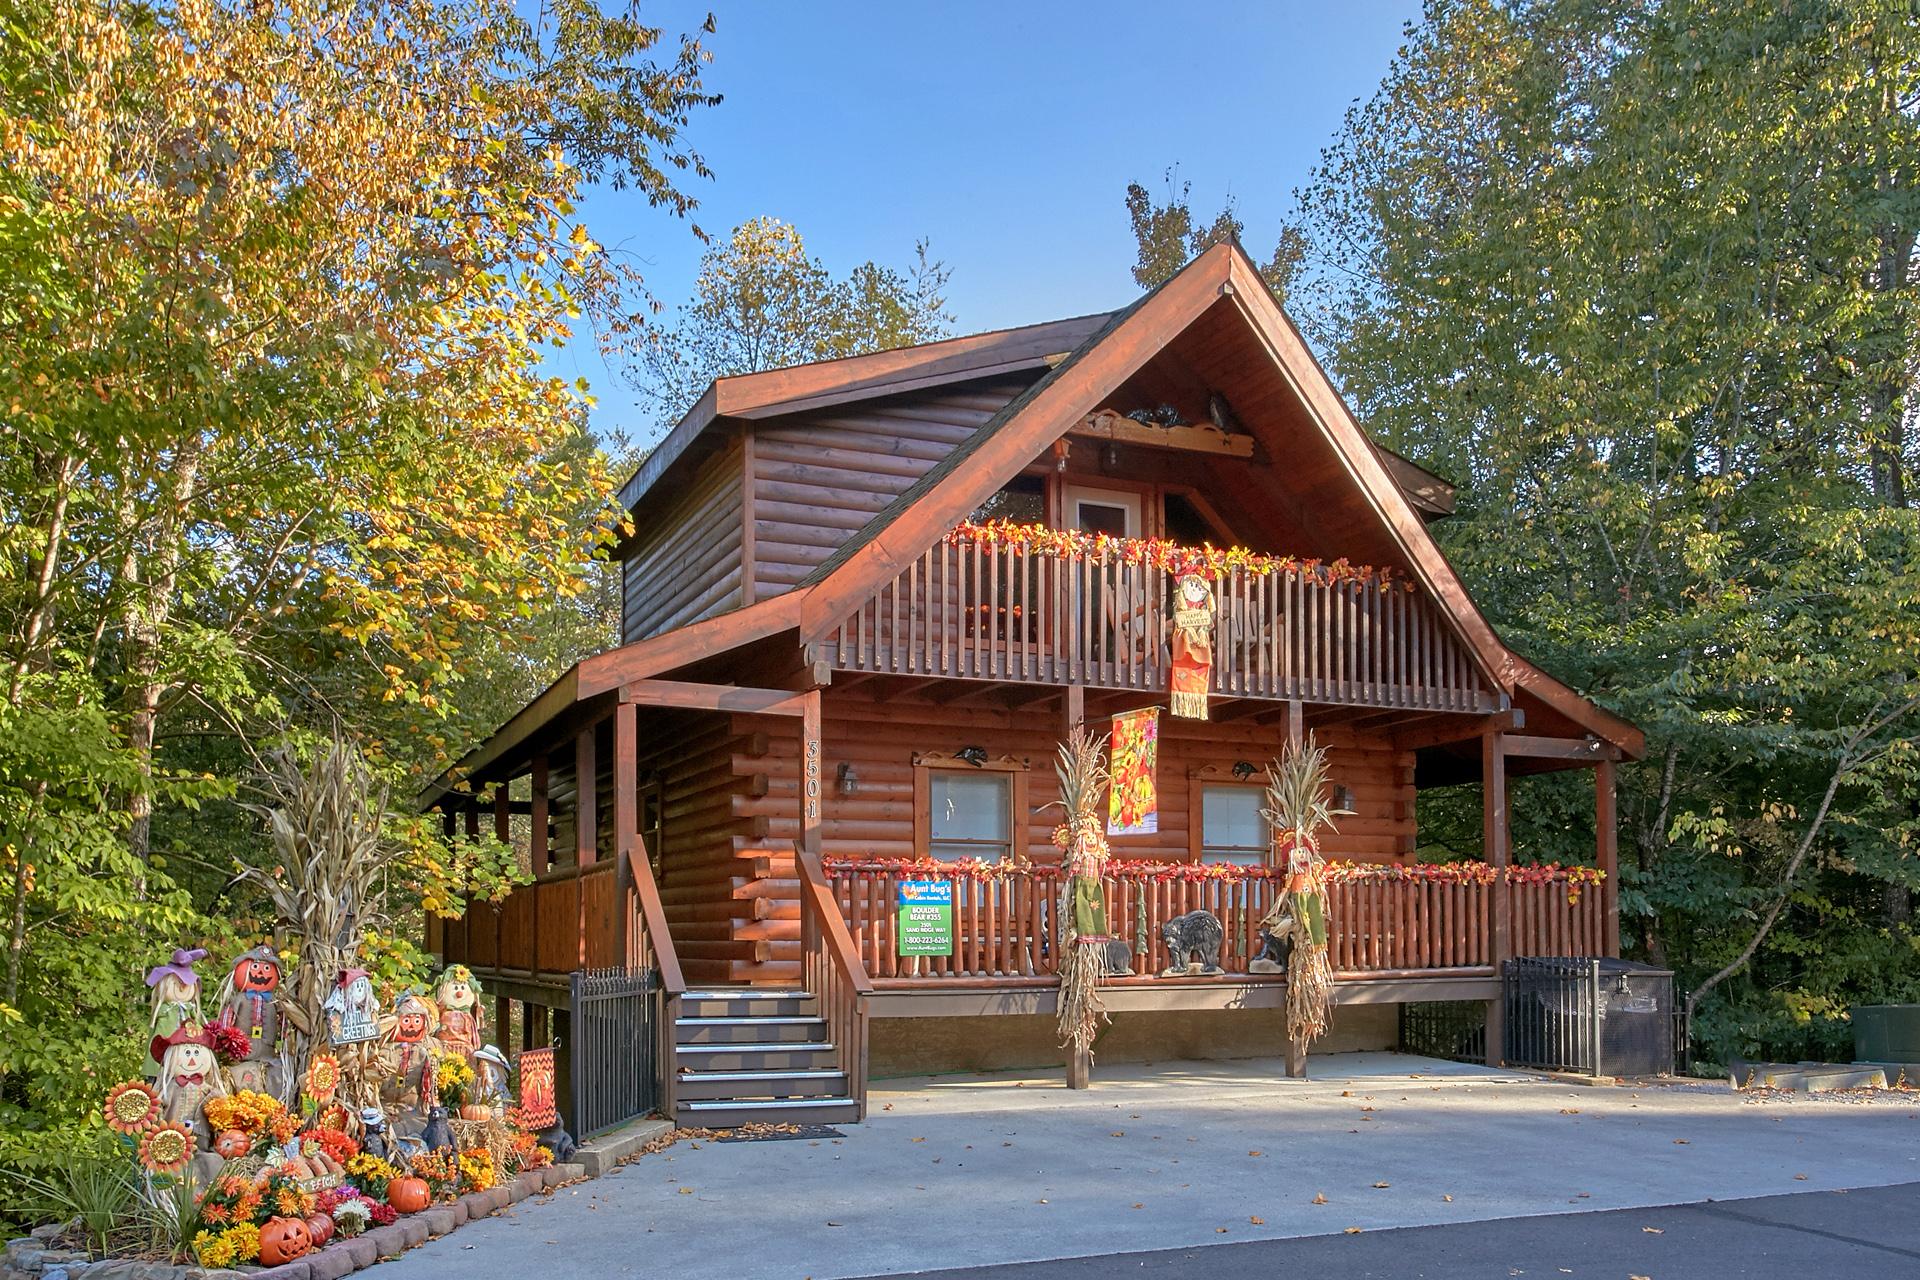 Seasonally decorated for the incredible vacation you're looking for in the Smokies!